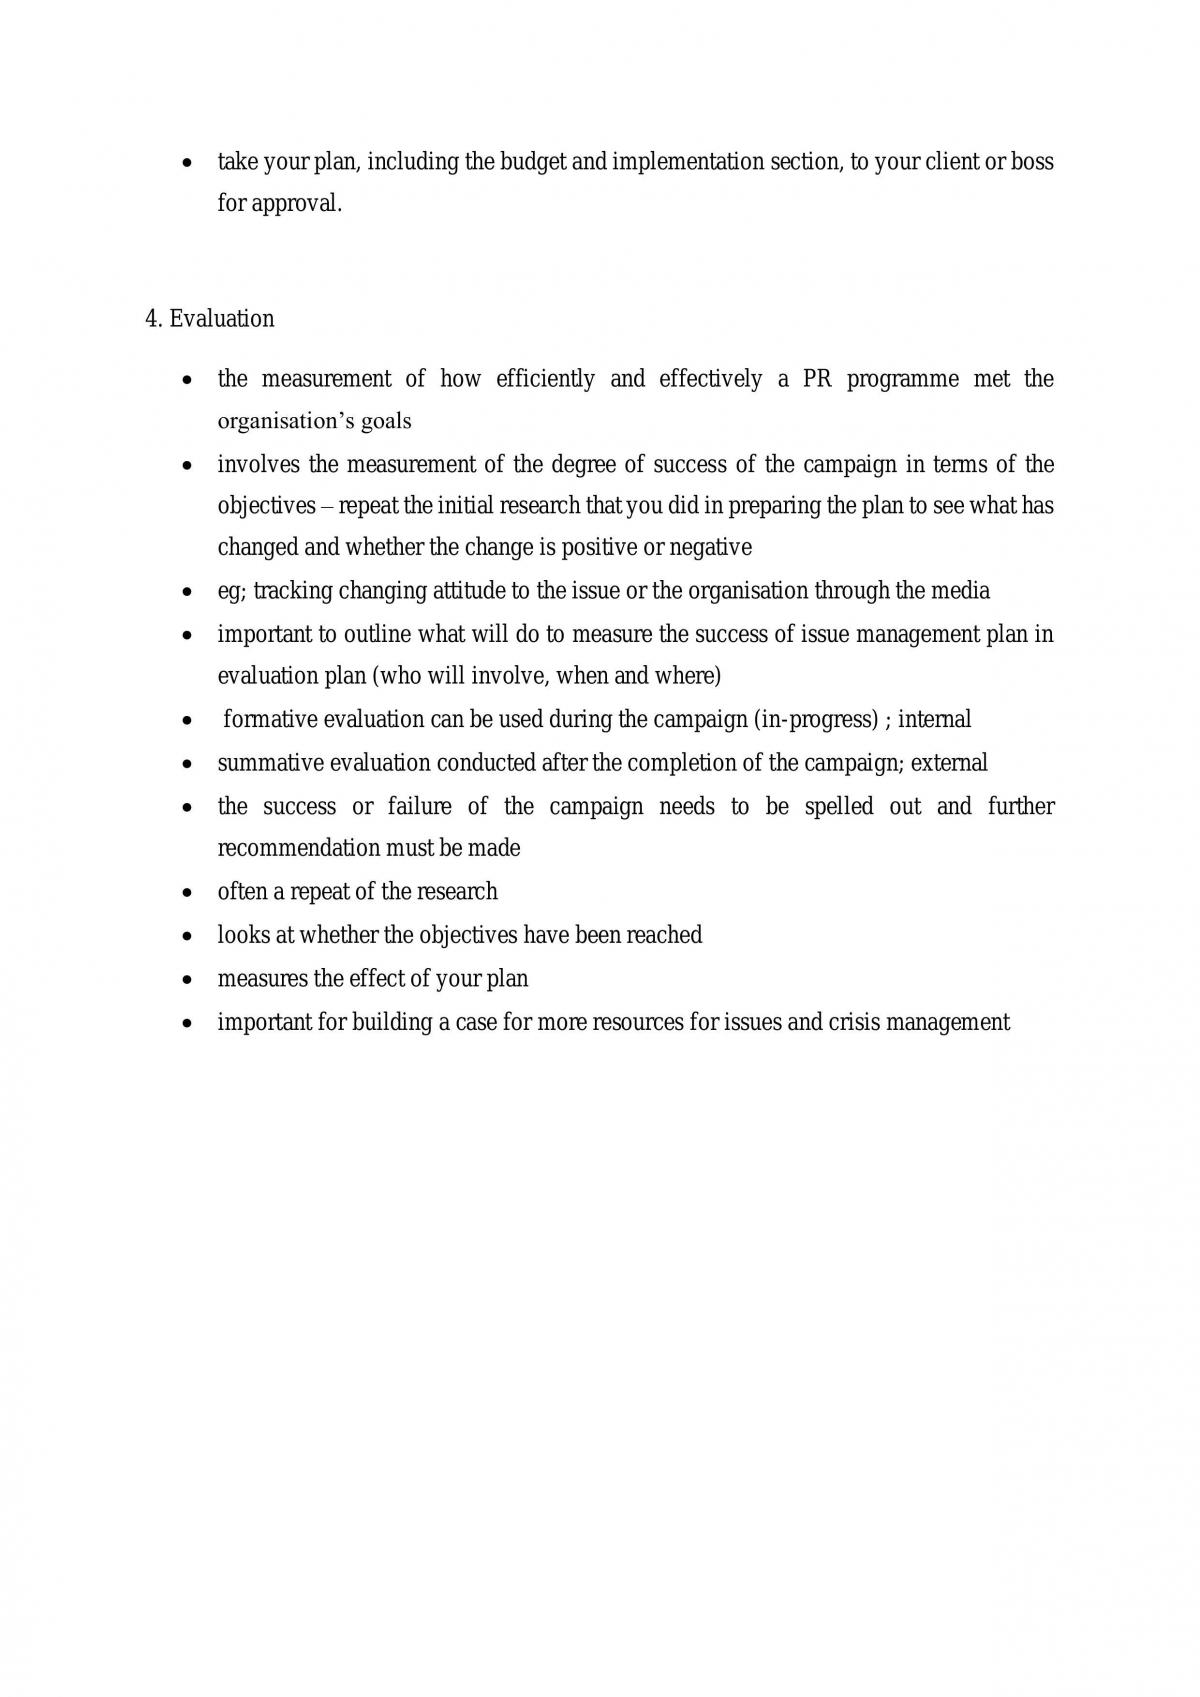 Study notes for Public Relations  - Page 10